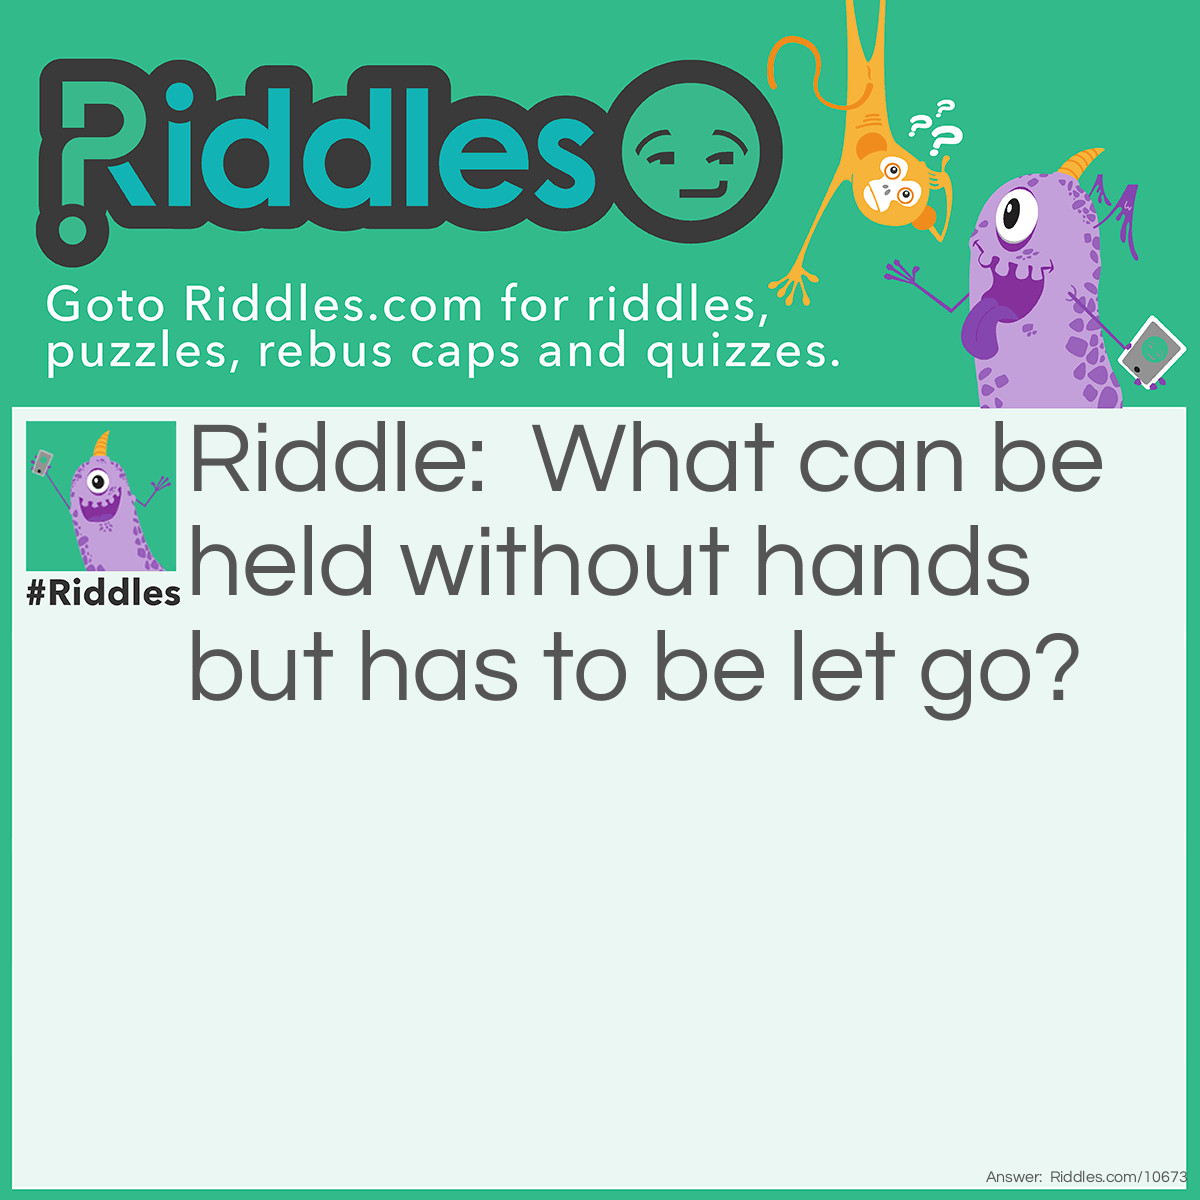 Riddle: What can be held without hands but has to be let go? Answer: A grudge.